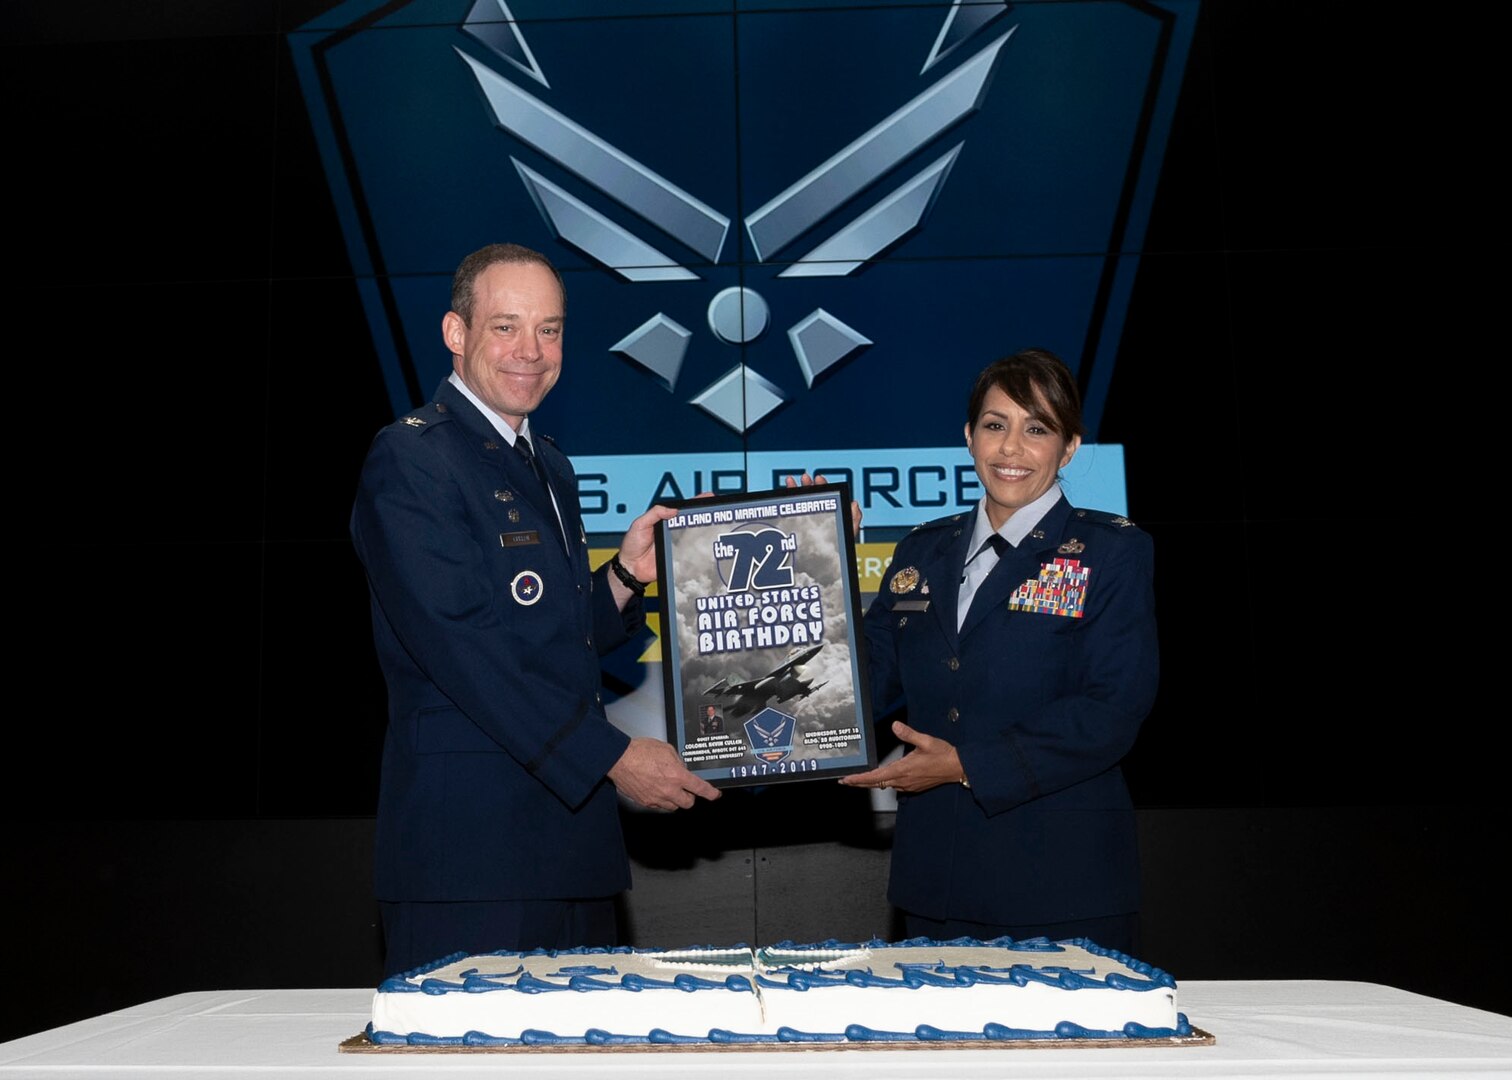 DLA L&M Chief of Staff presents Colonel Cullen with gift